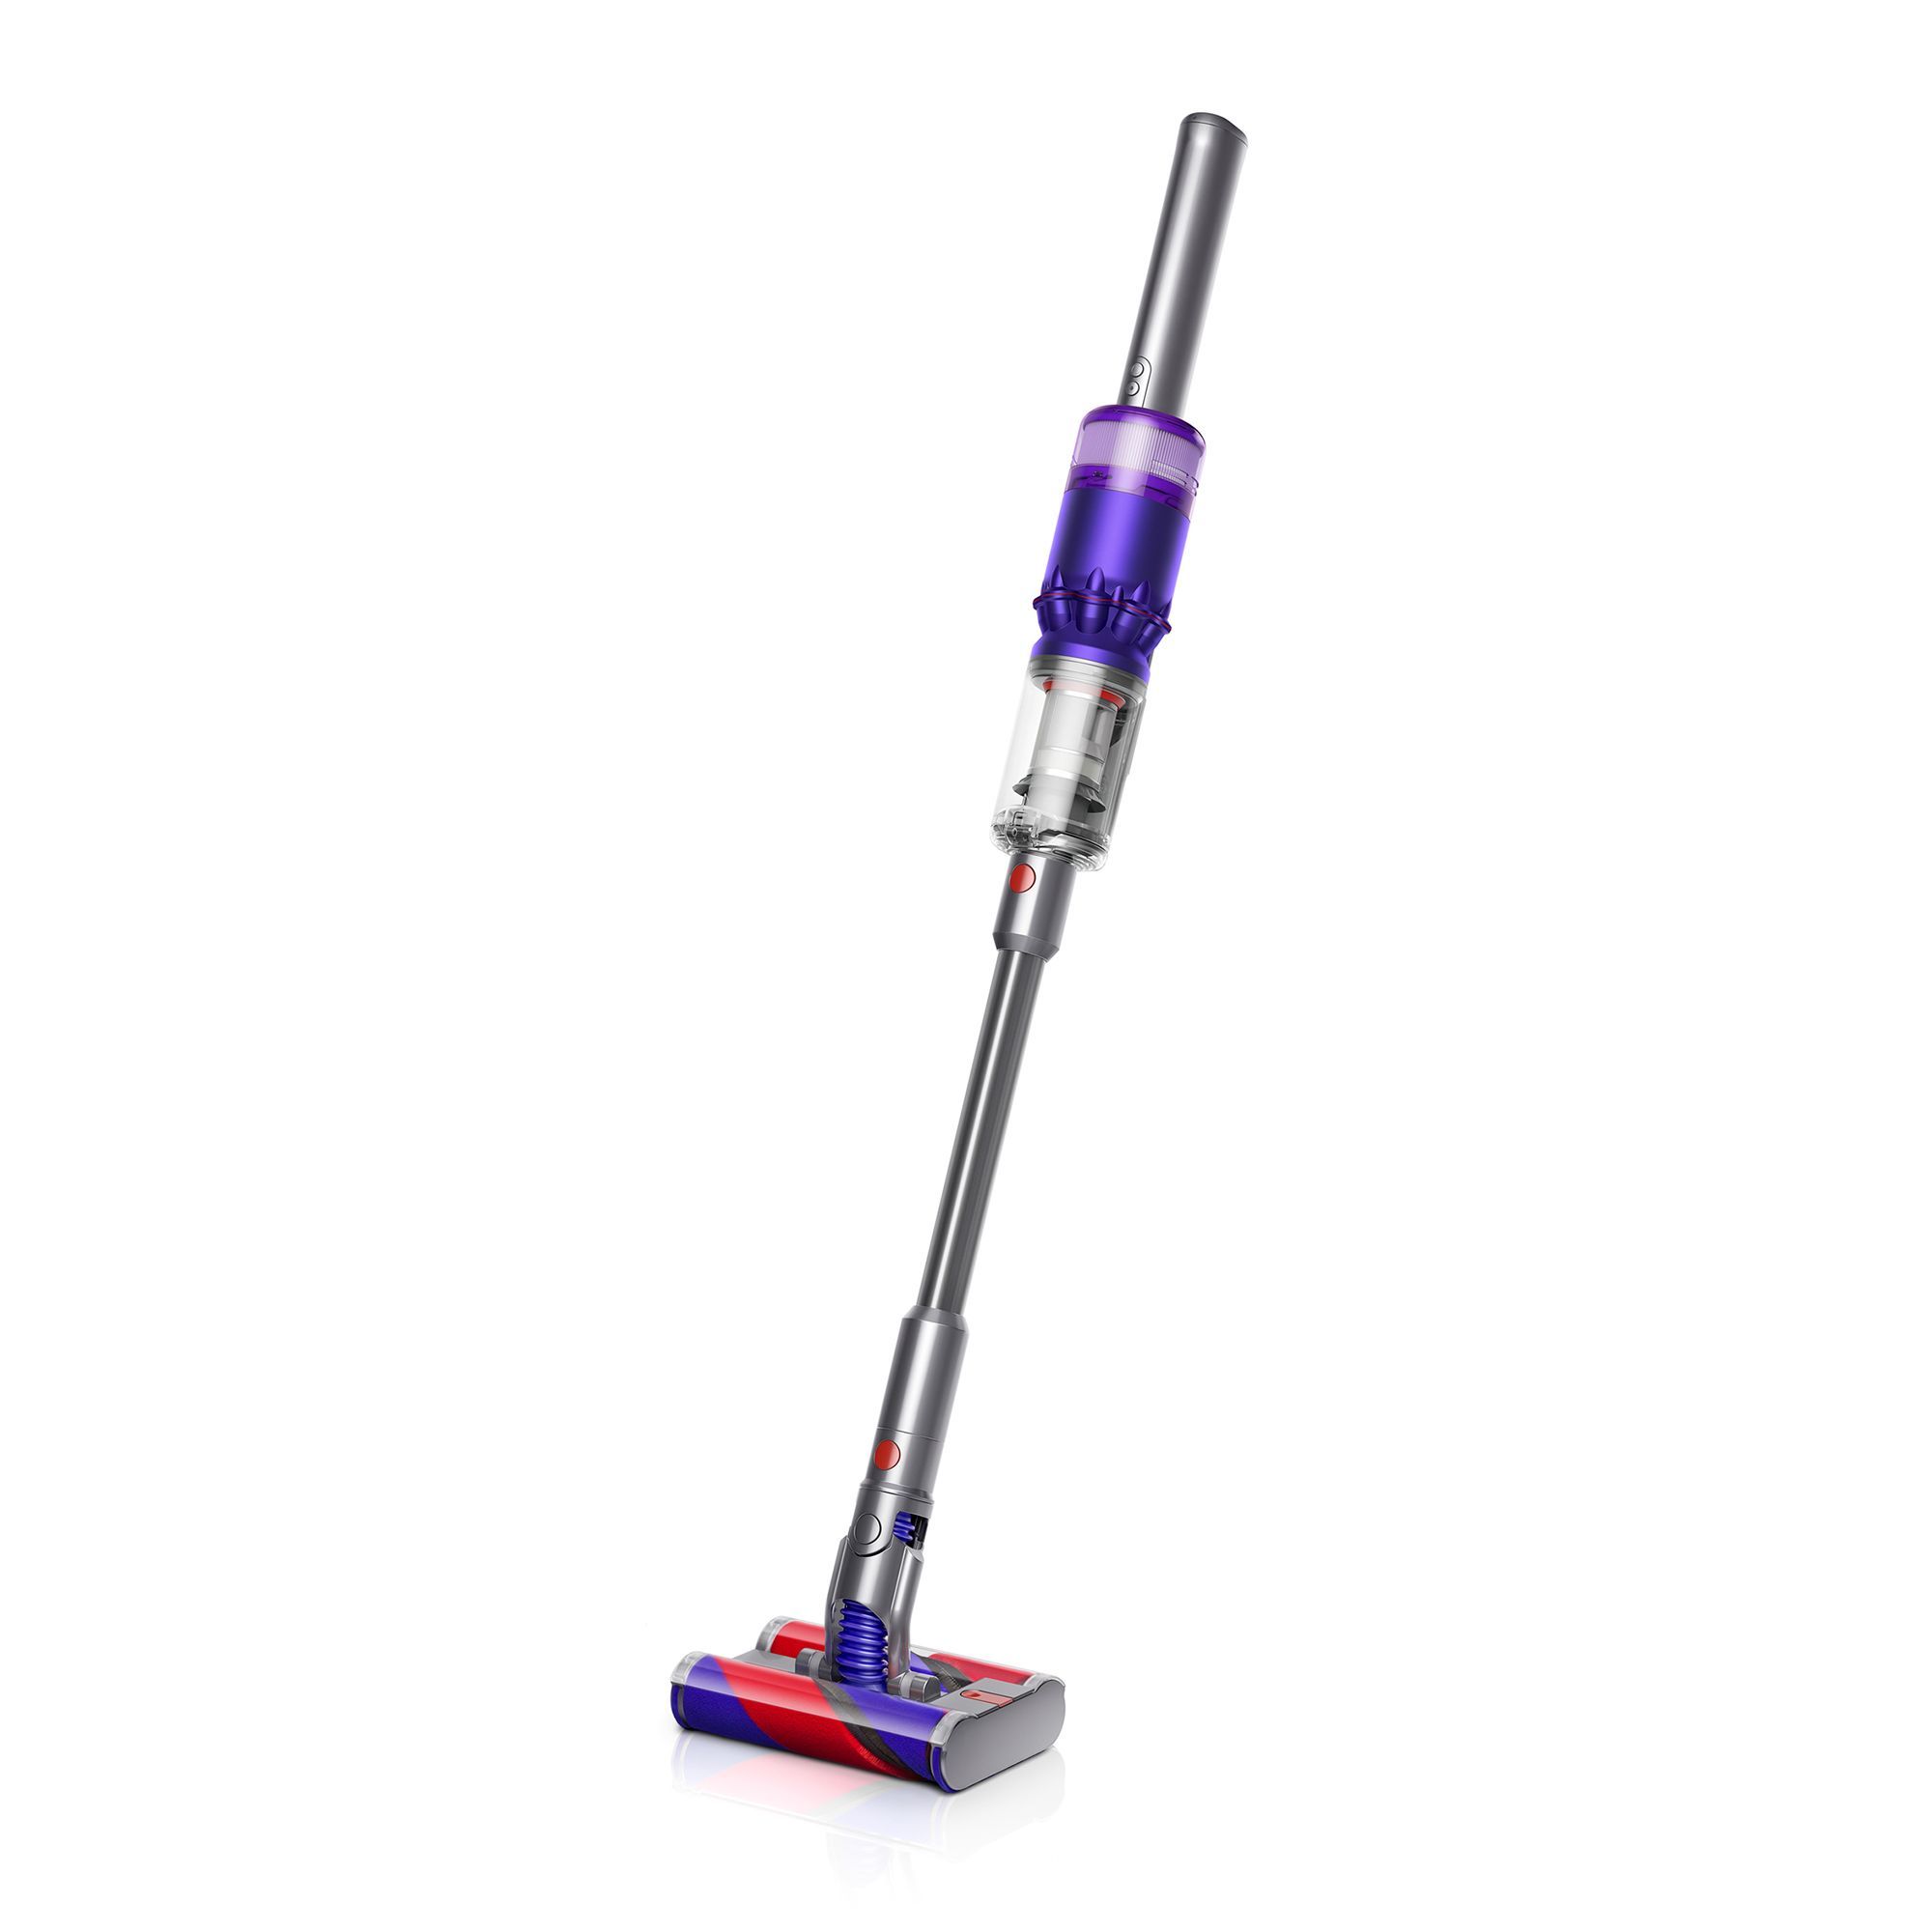 8 Best Vacuums For Hardwood Floors To, Is Dyson Ball Good For Hardwood Floors